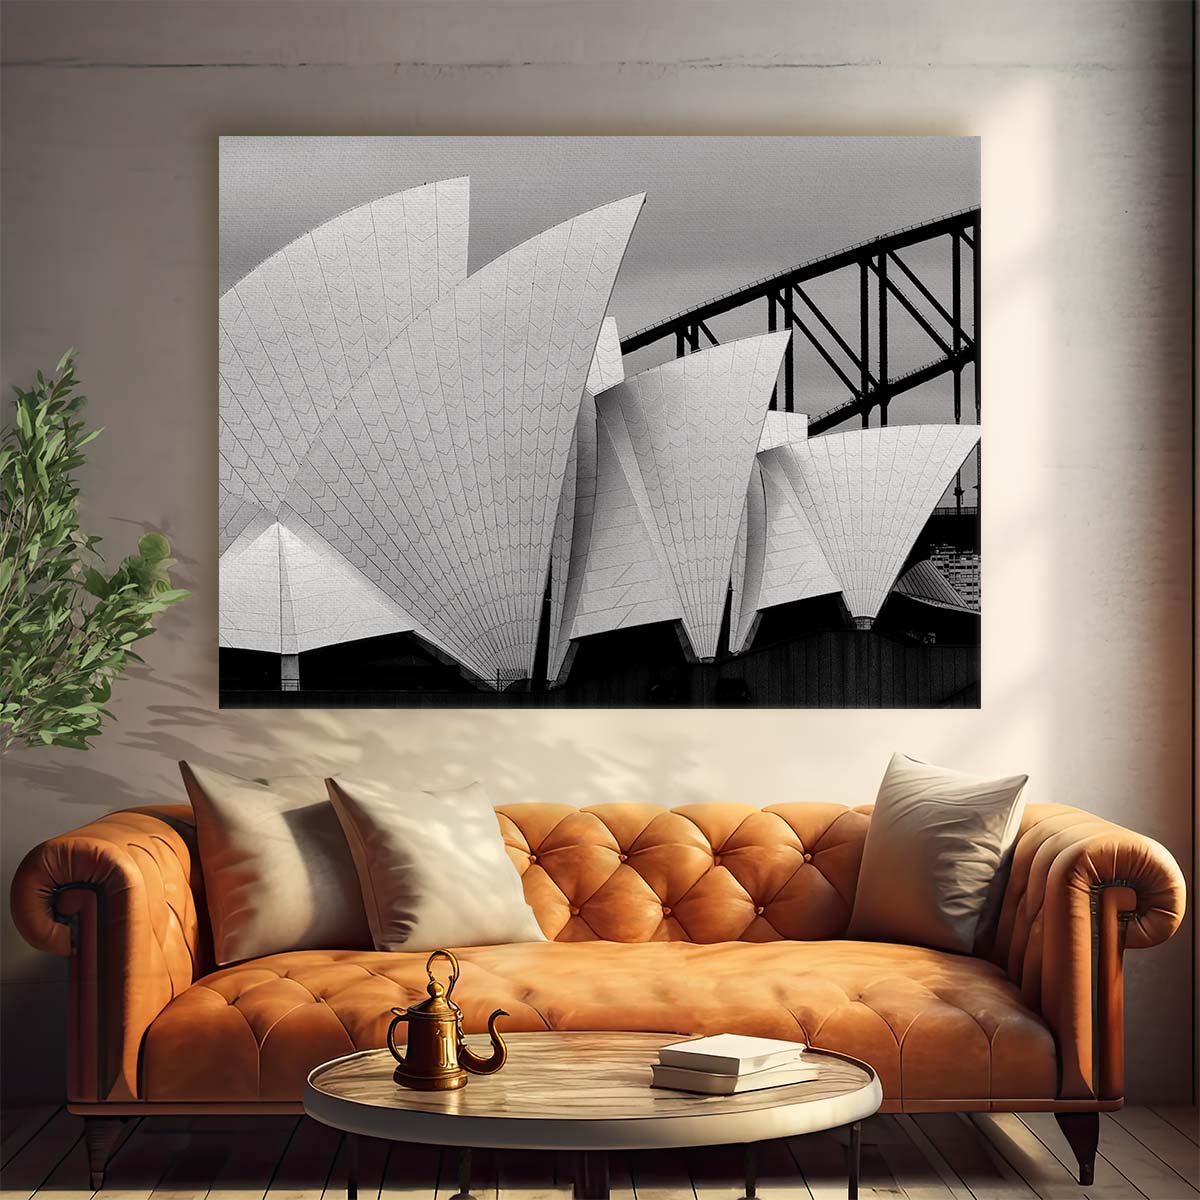 Iconic Sydney Opera House Monochrome Architecture Wall Art by Luxuriance Designs. Made in USA.